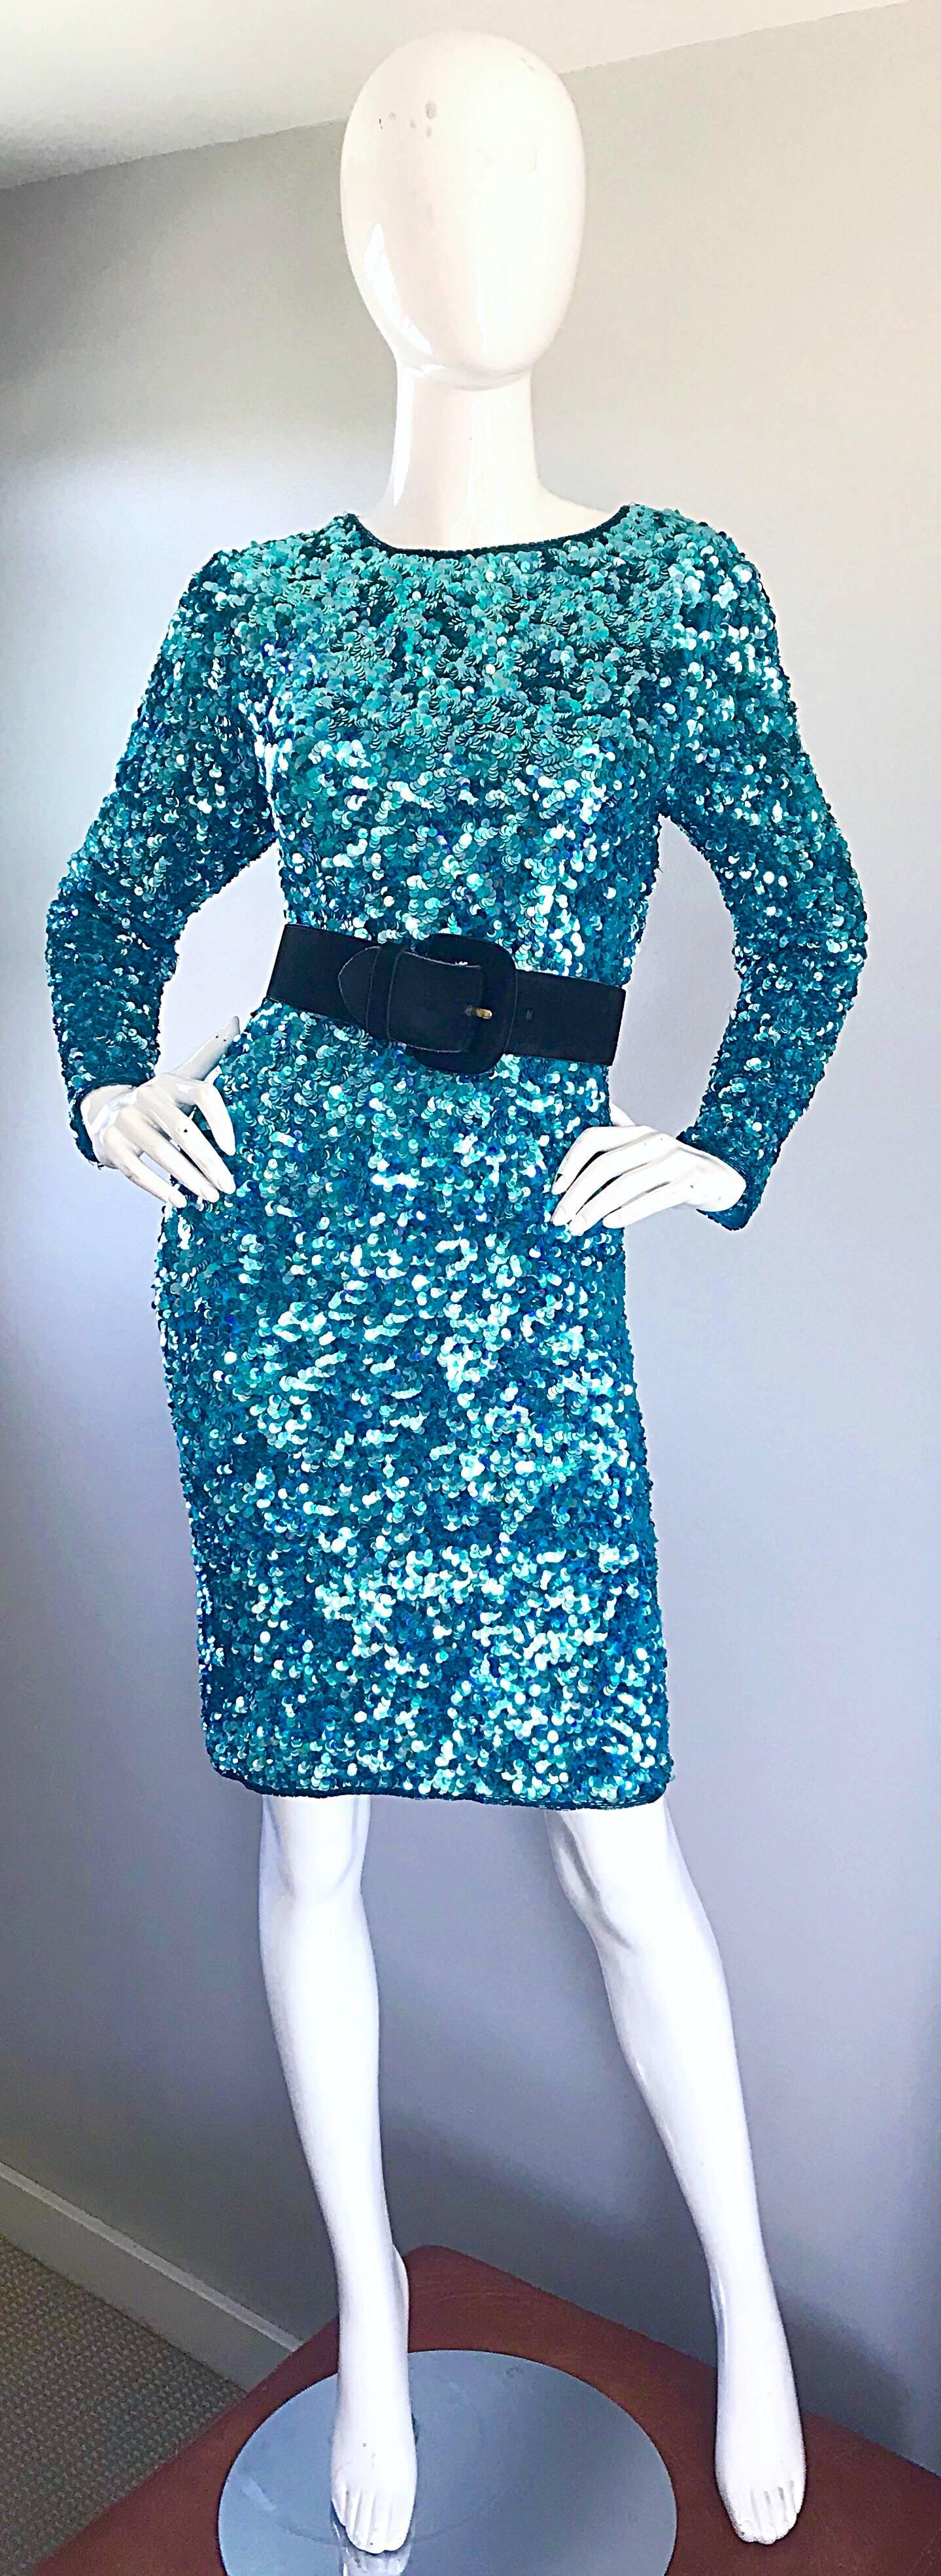 Women's Gorgeous Size 12 - 14 Vintage Turquoise Blue Long Sleeve 90s Fully Sequin Dress